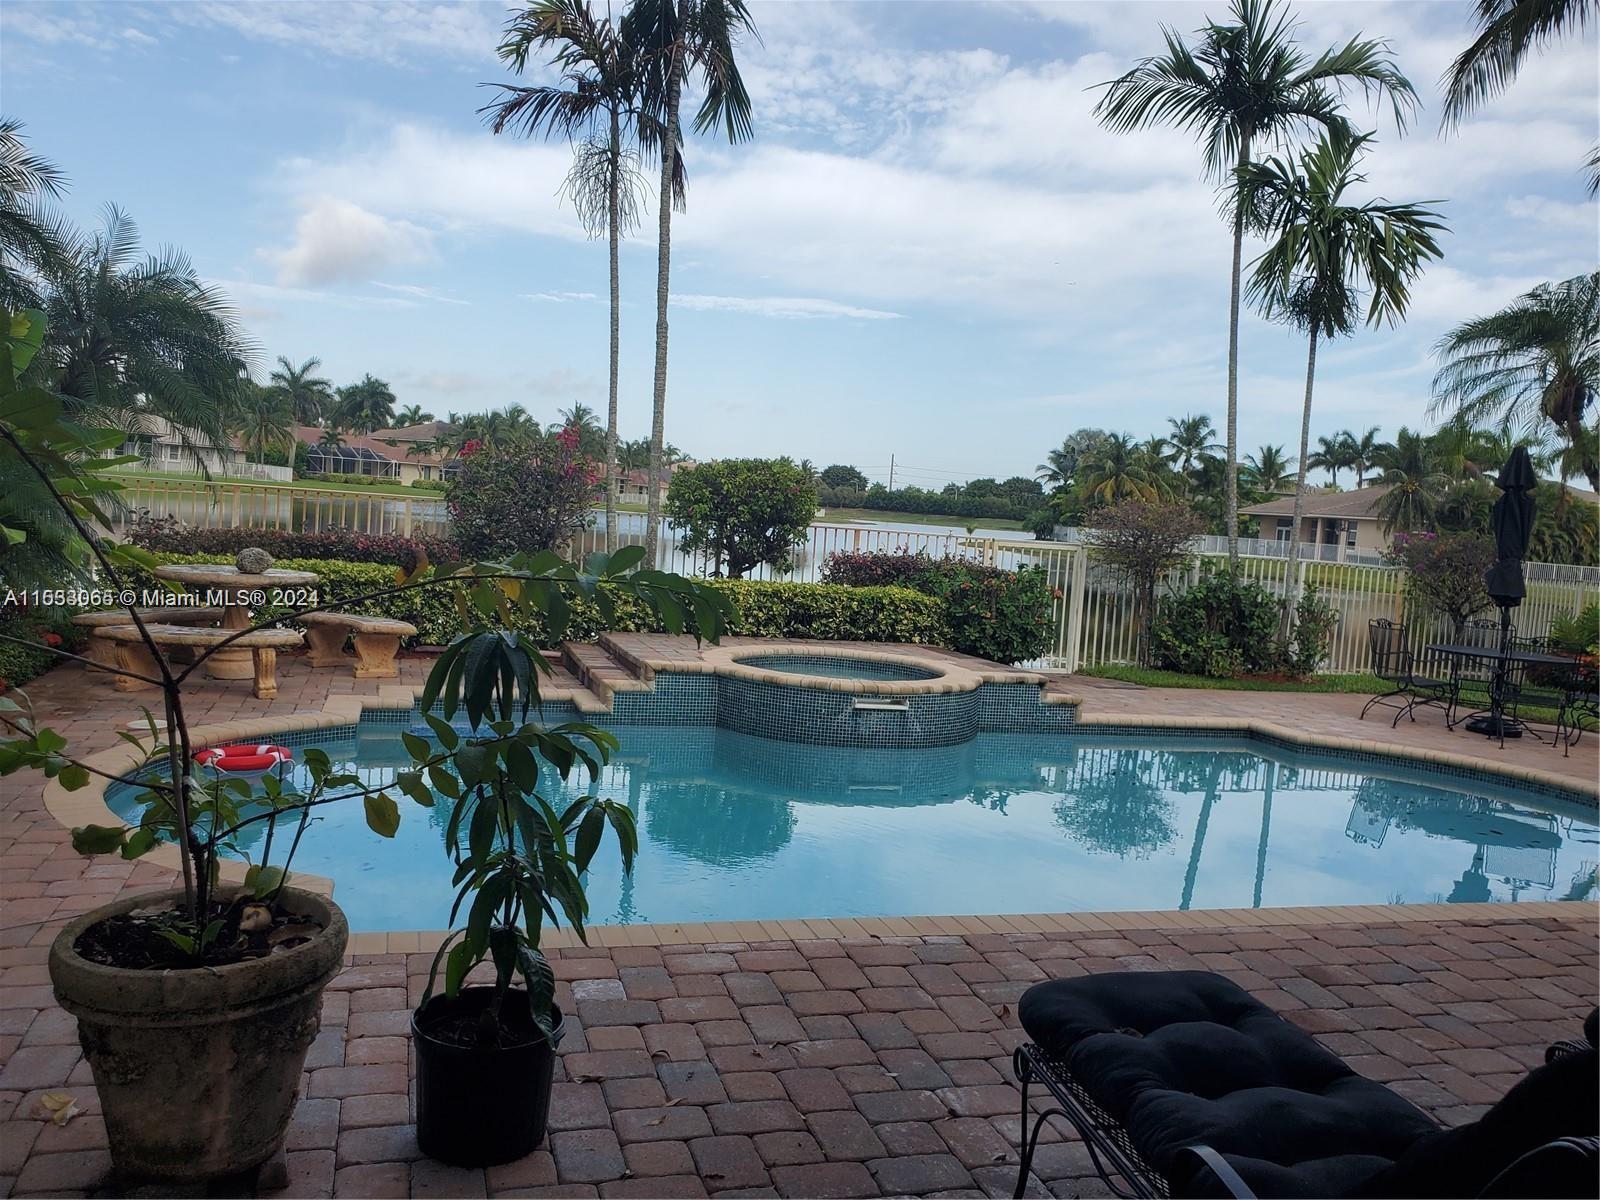 House for Rent in Weston, FL